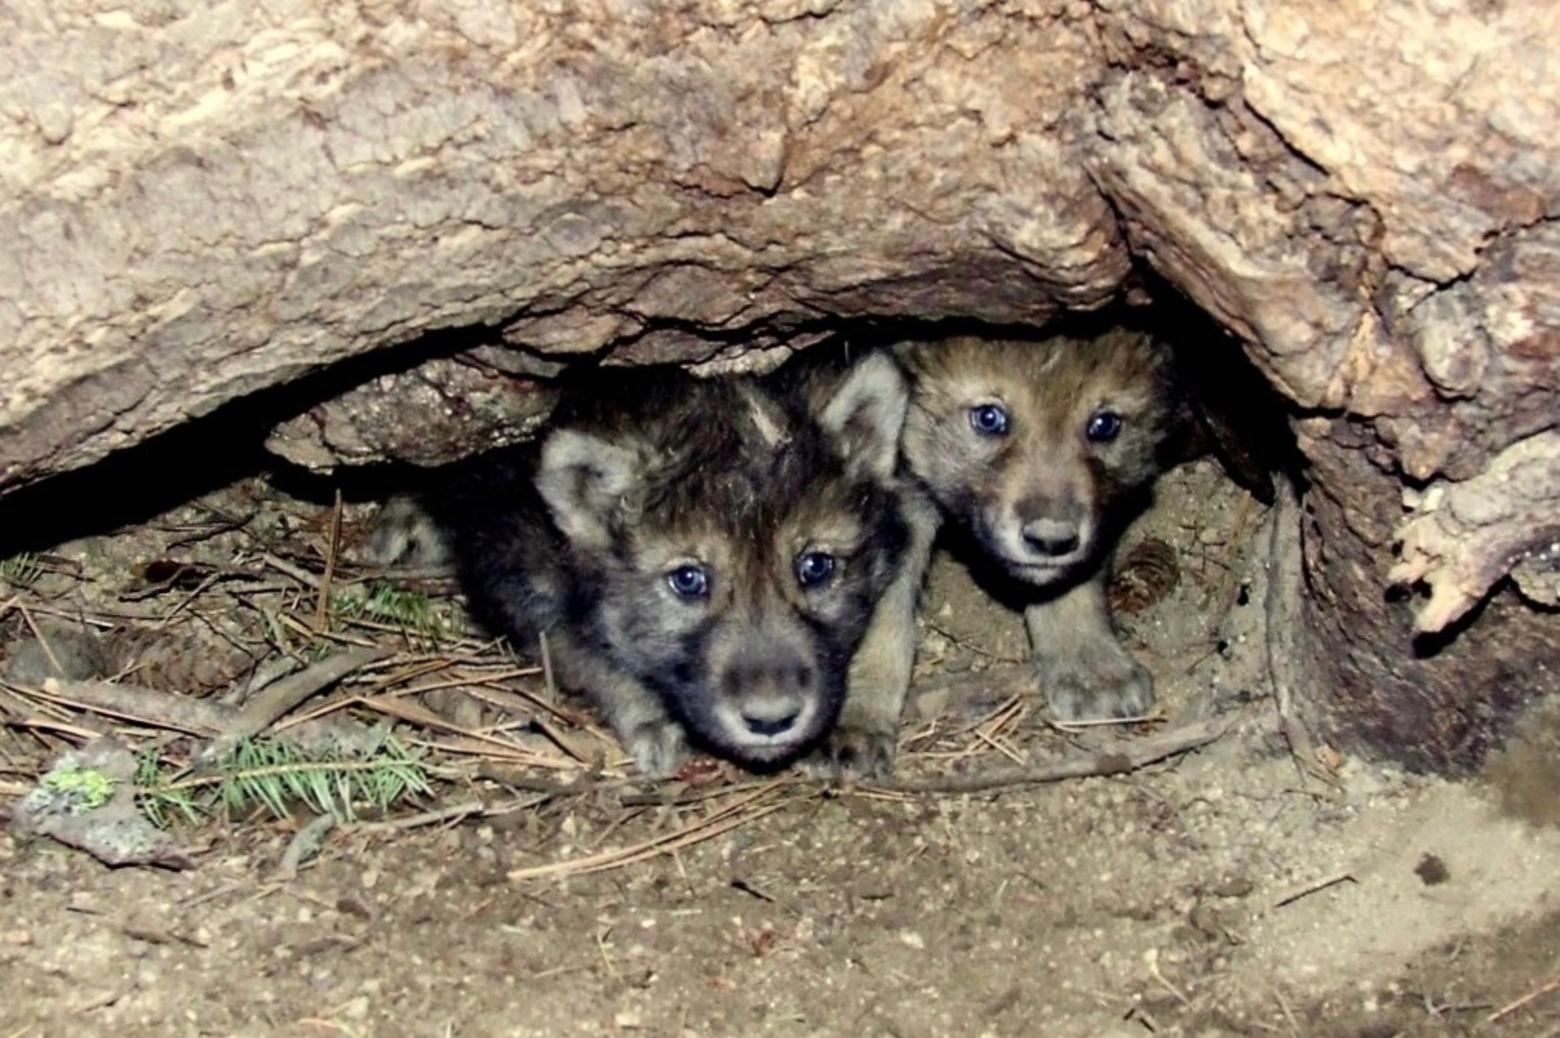 A return to the Dark Ages of dealing with wildlife carnivores? What could possibly be sporting or done in the spirit of "fair chase hunting" to allow wolf pups to be killed in their dens?  These are questions that even many sportsmen and sportswomen are asking, saying that it gives hunting a bad name.  Photo courtesy USFWS/Hilary Cooley